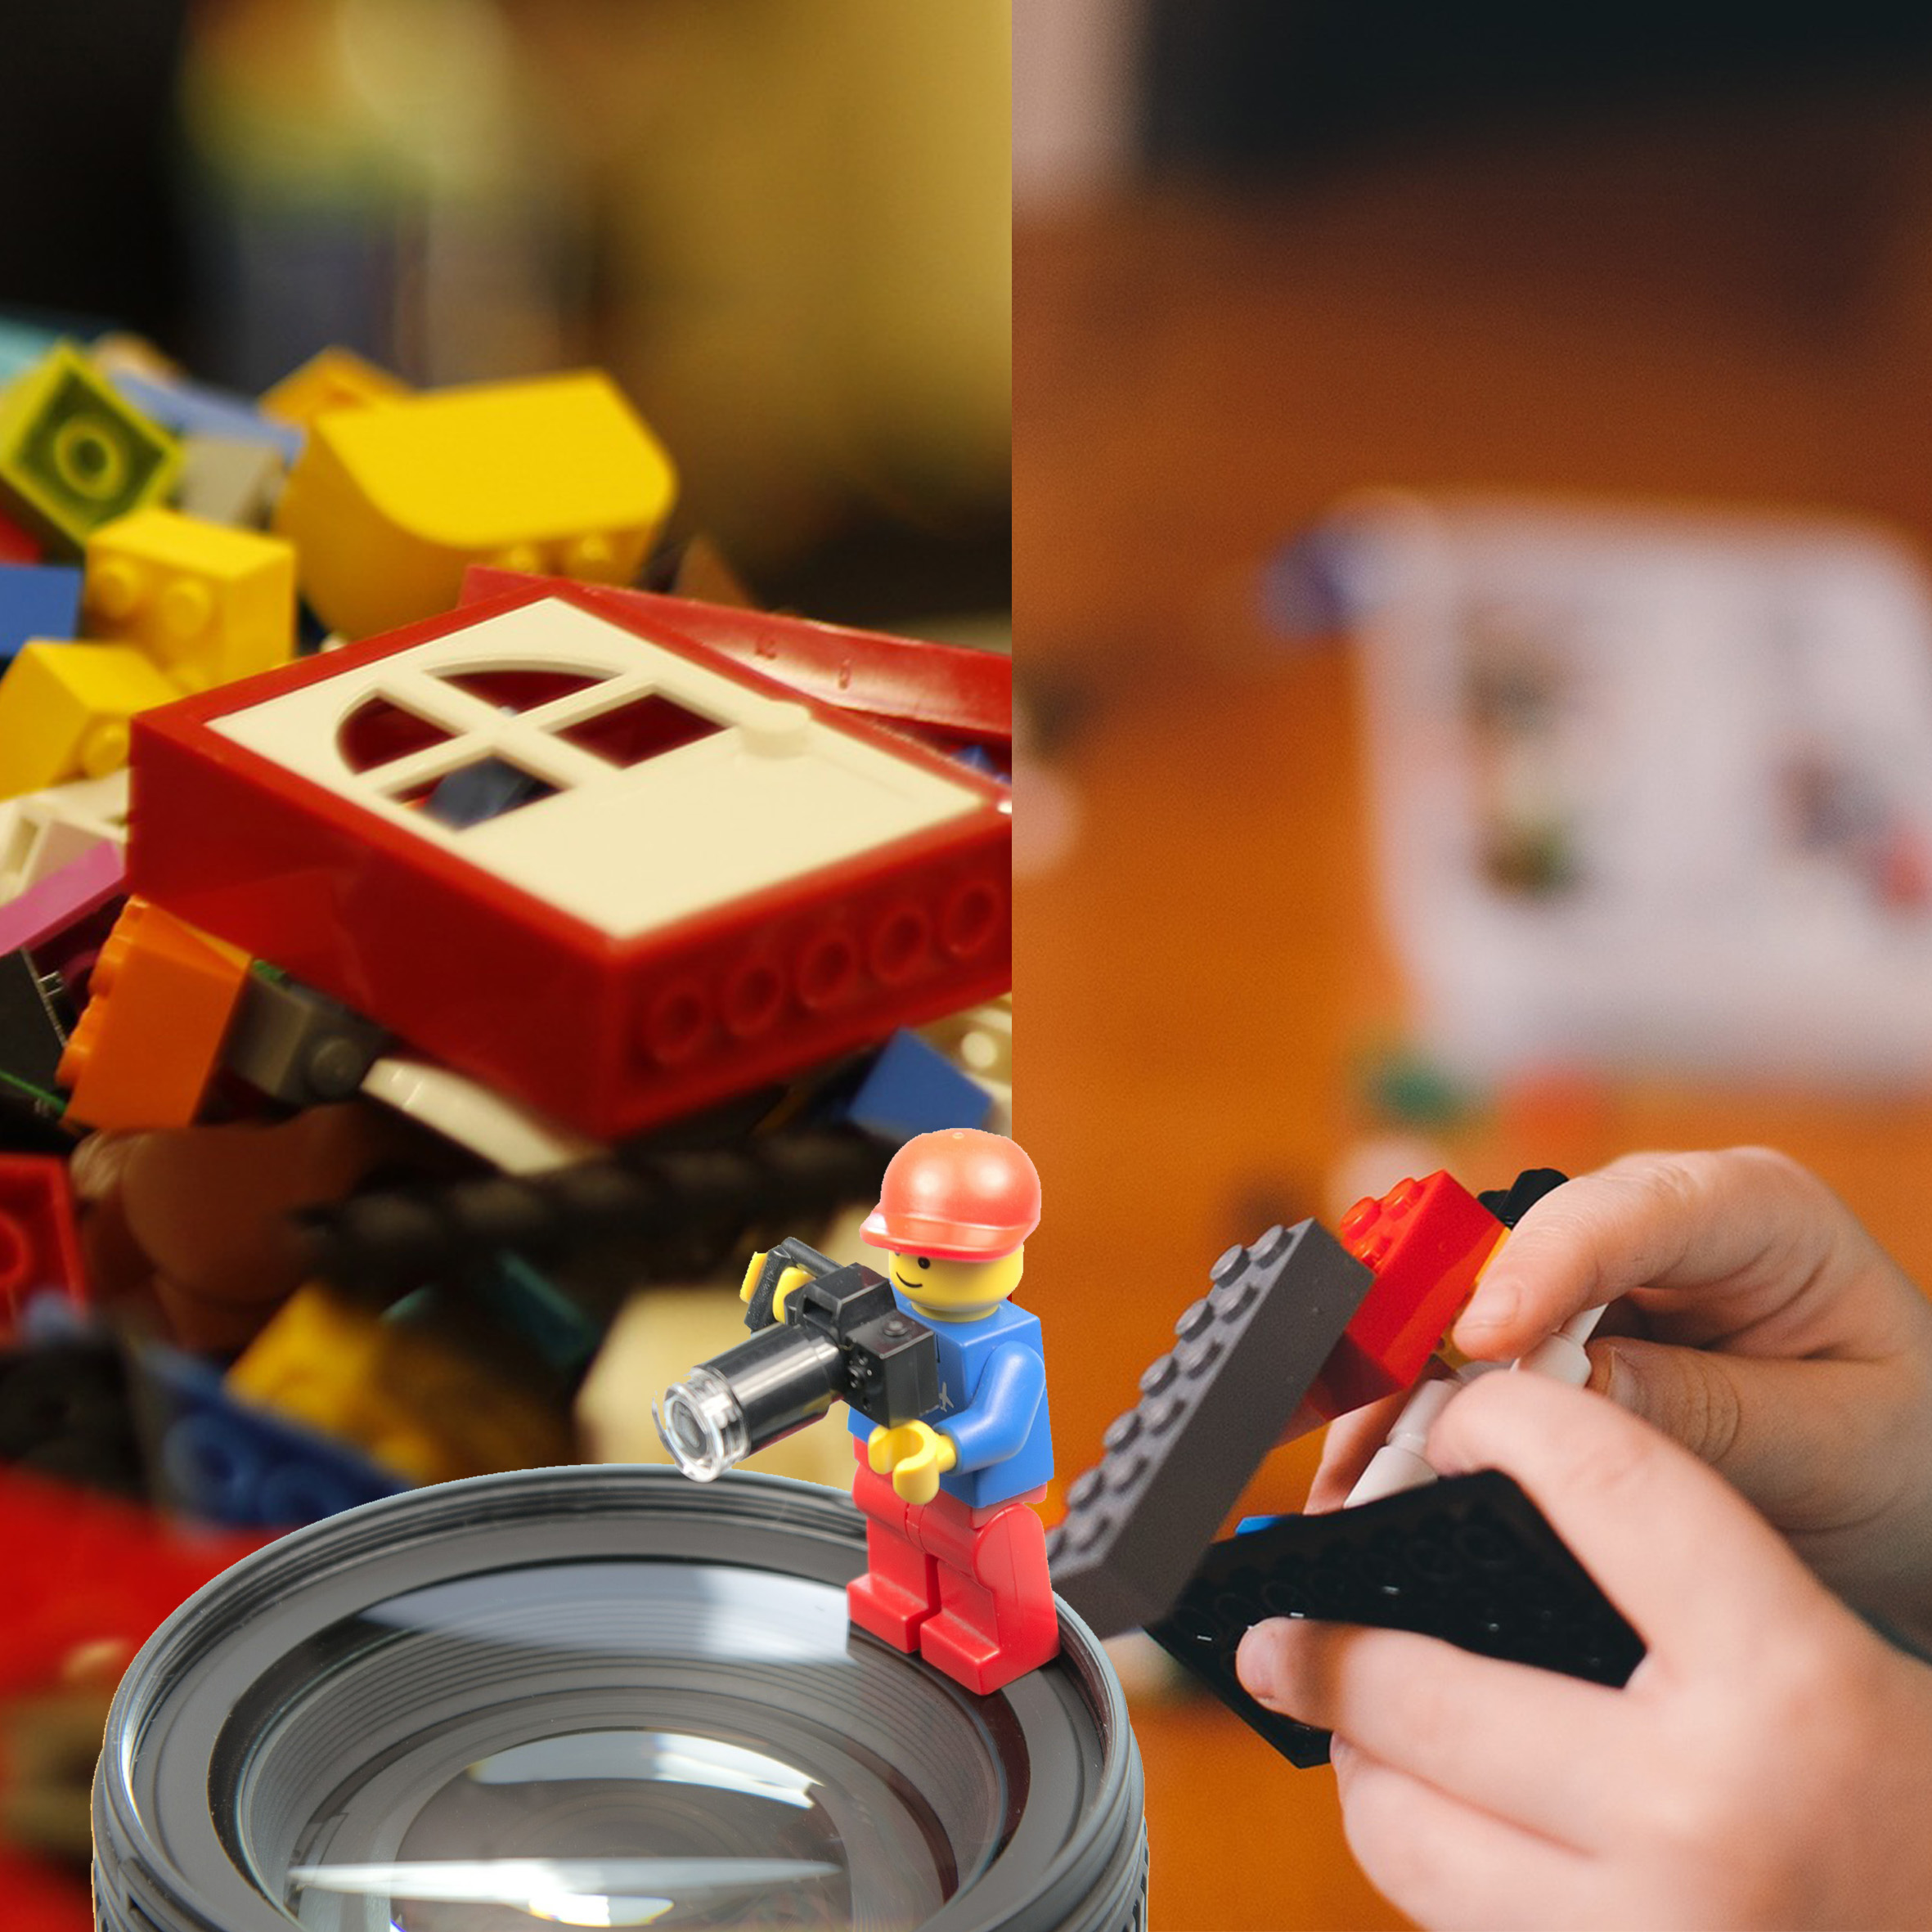 a child's hands playing with LEGO bricks and a LEGO figure on a camera lens